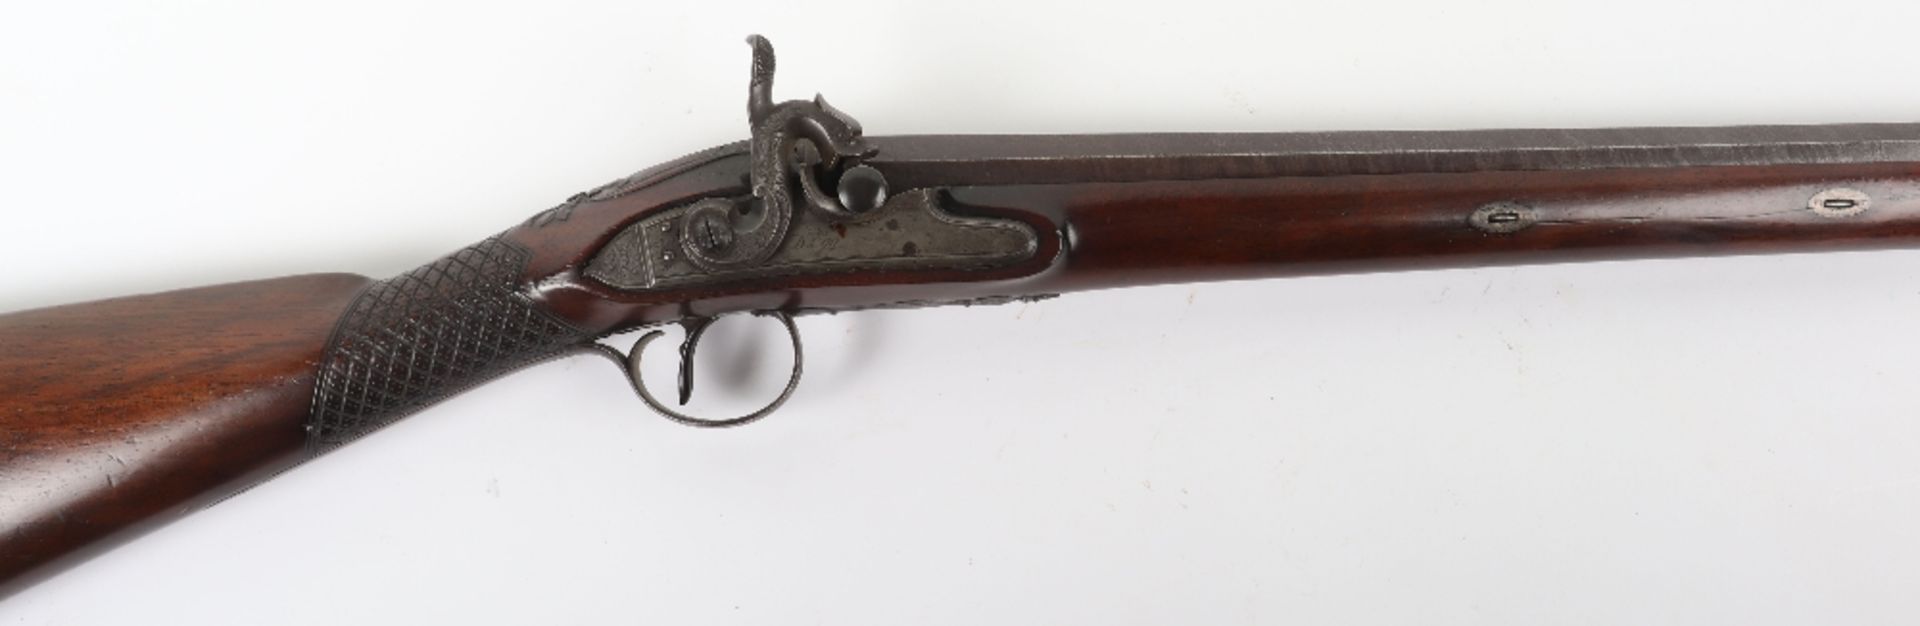 16-Bore Percussion Sporting Gun by D. Egg, Late 18th Century - Image 2 of 15